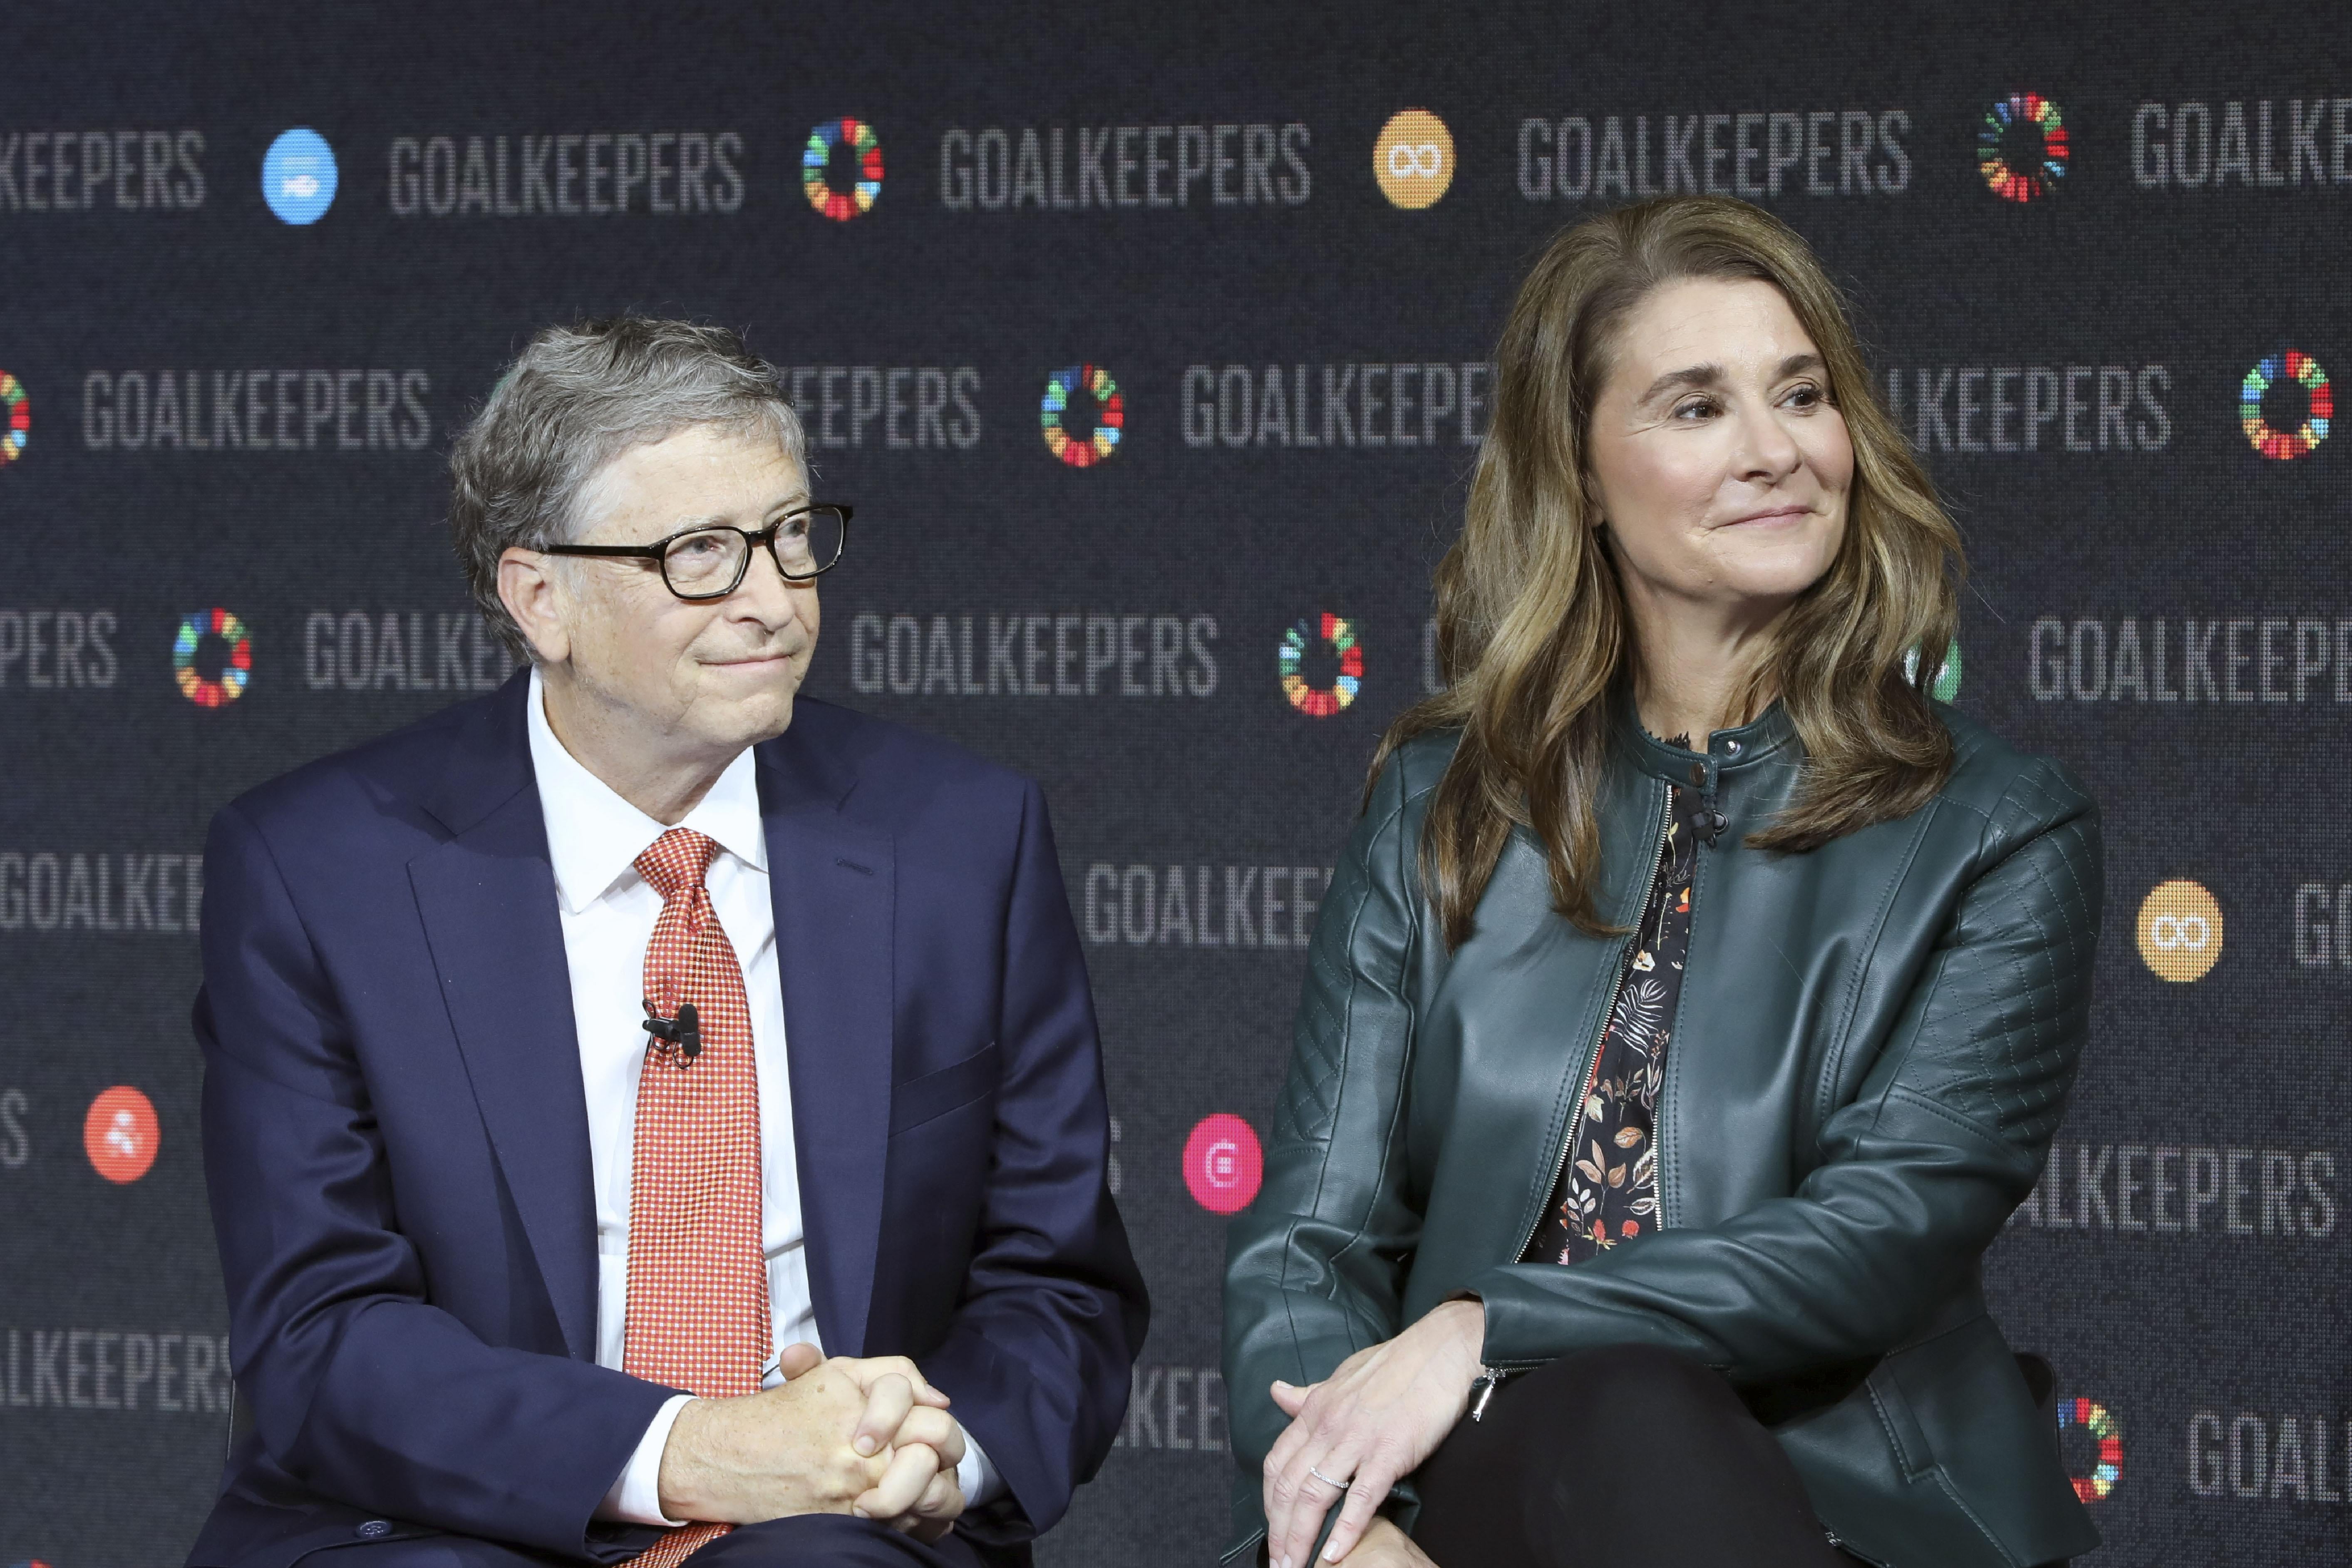 Bill Gates and Melinda Gates seated next to each other onstage at an event at Lincoln Center in New York in 2018.